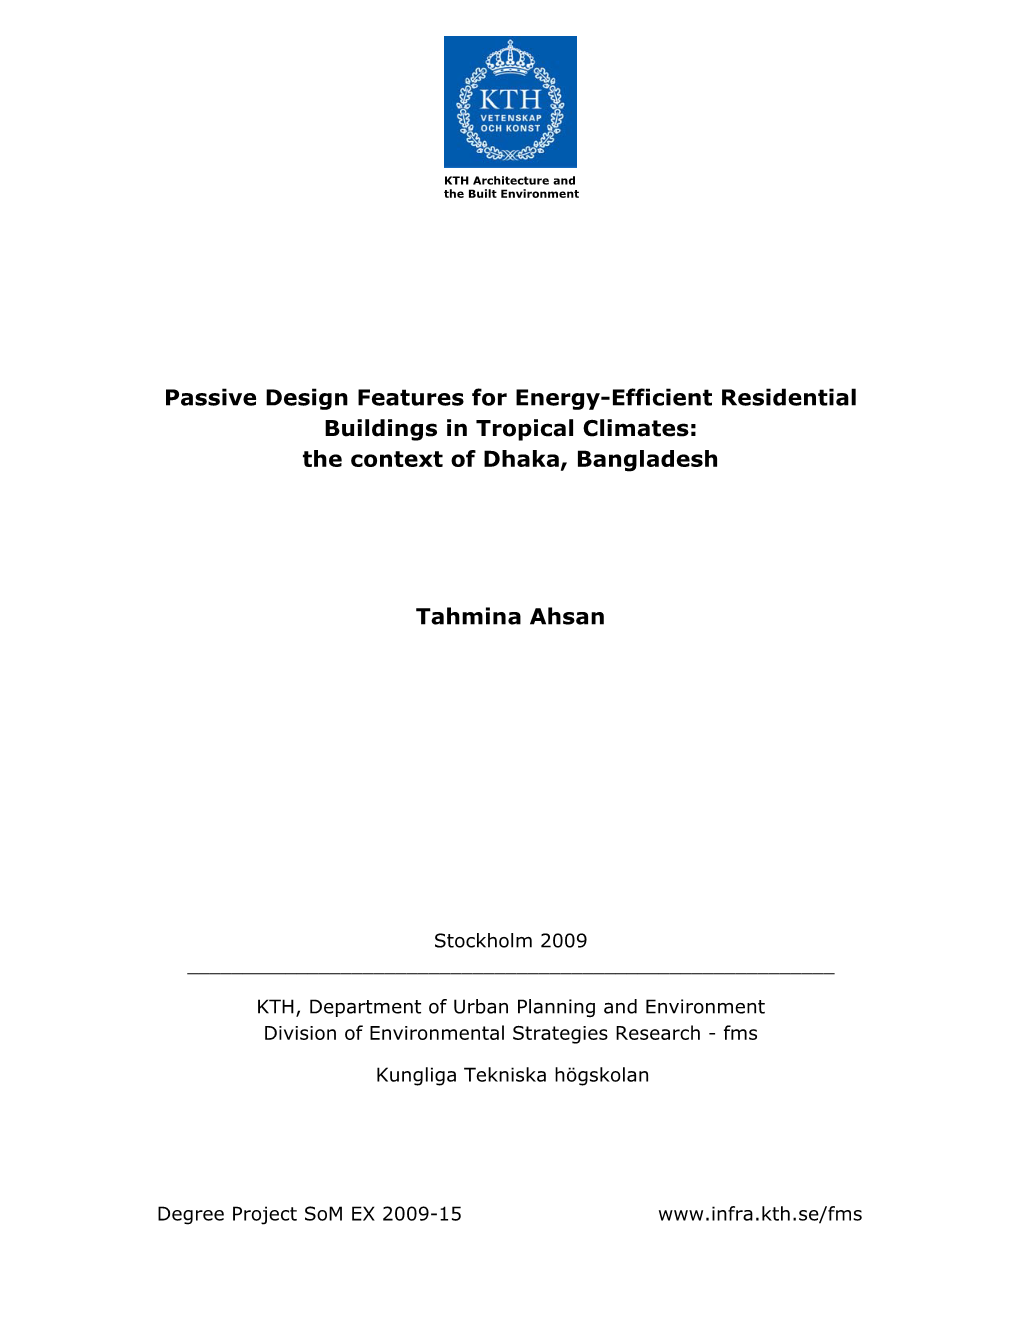 Passive Design Features for Energy-Efficient Residential Buildings in Tropical Climates: the Context of Dhaka, Bangladesh